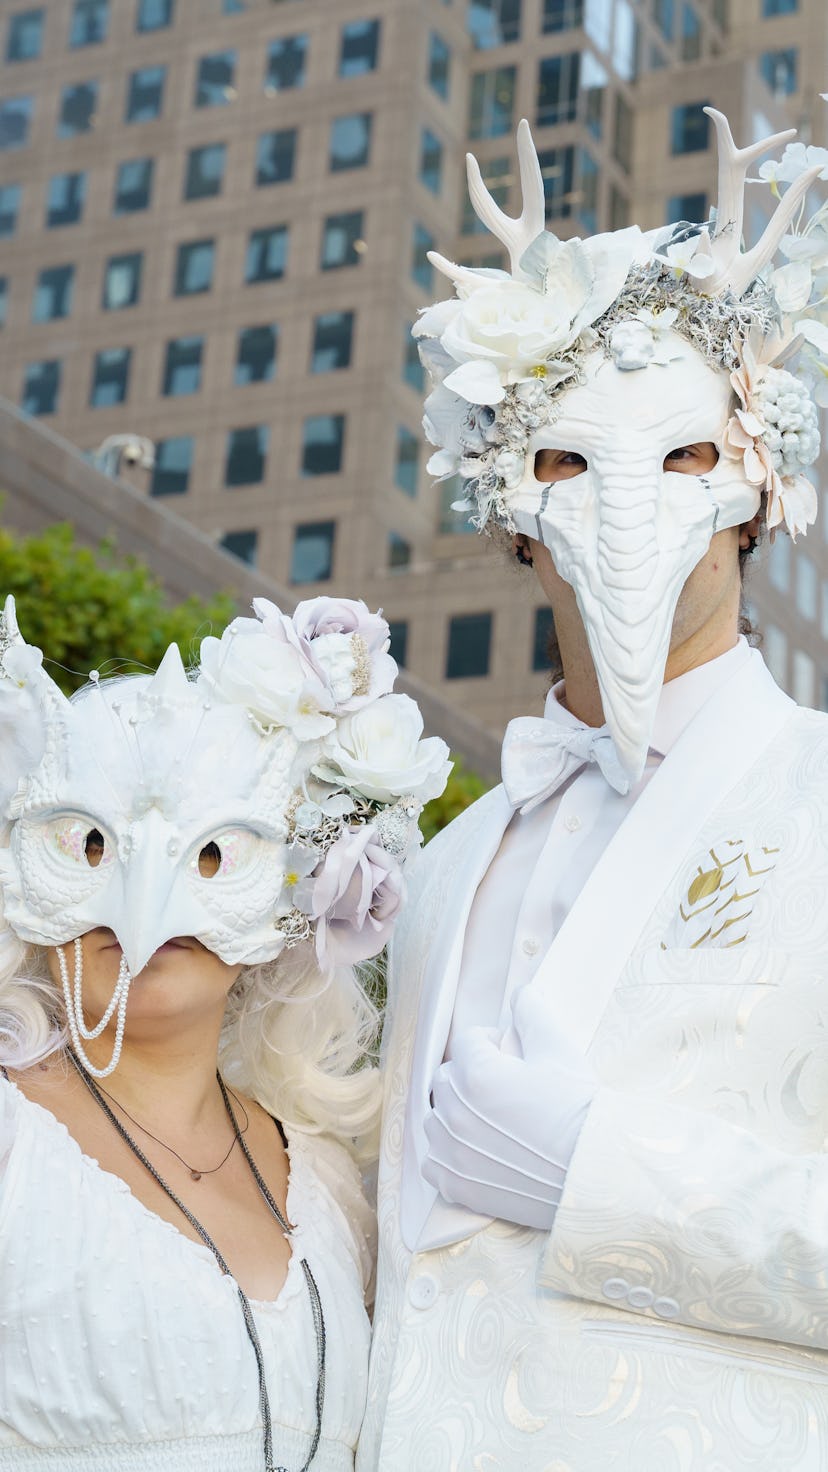 The best photos from Diner en Blanc NYC 2022 are amazing.